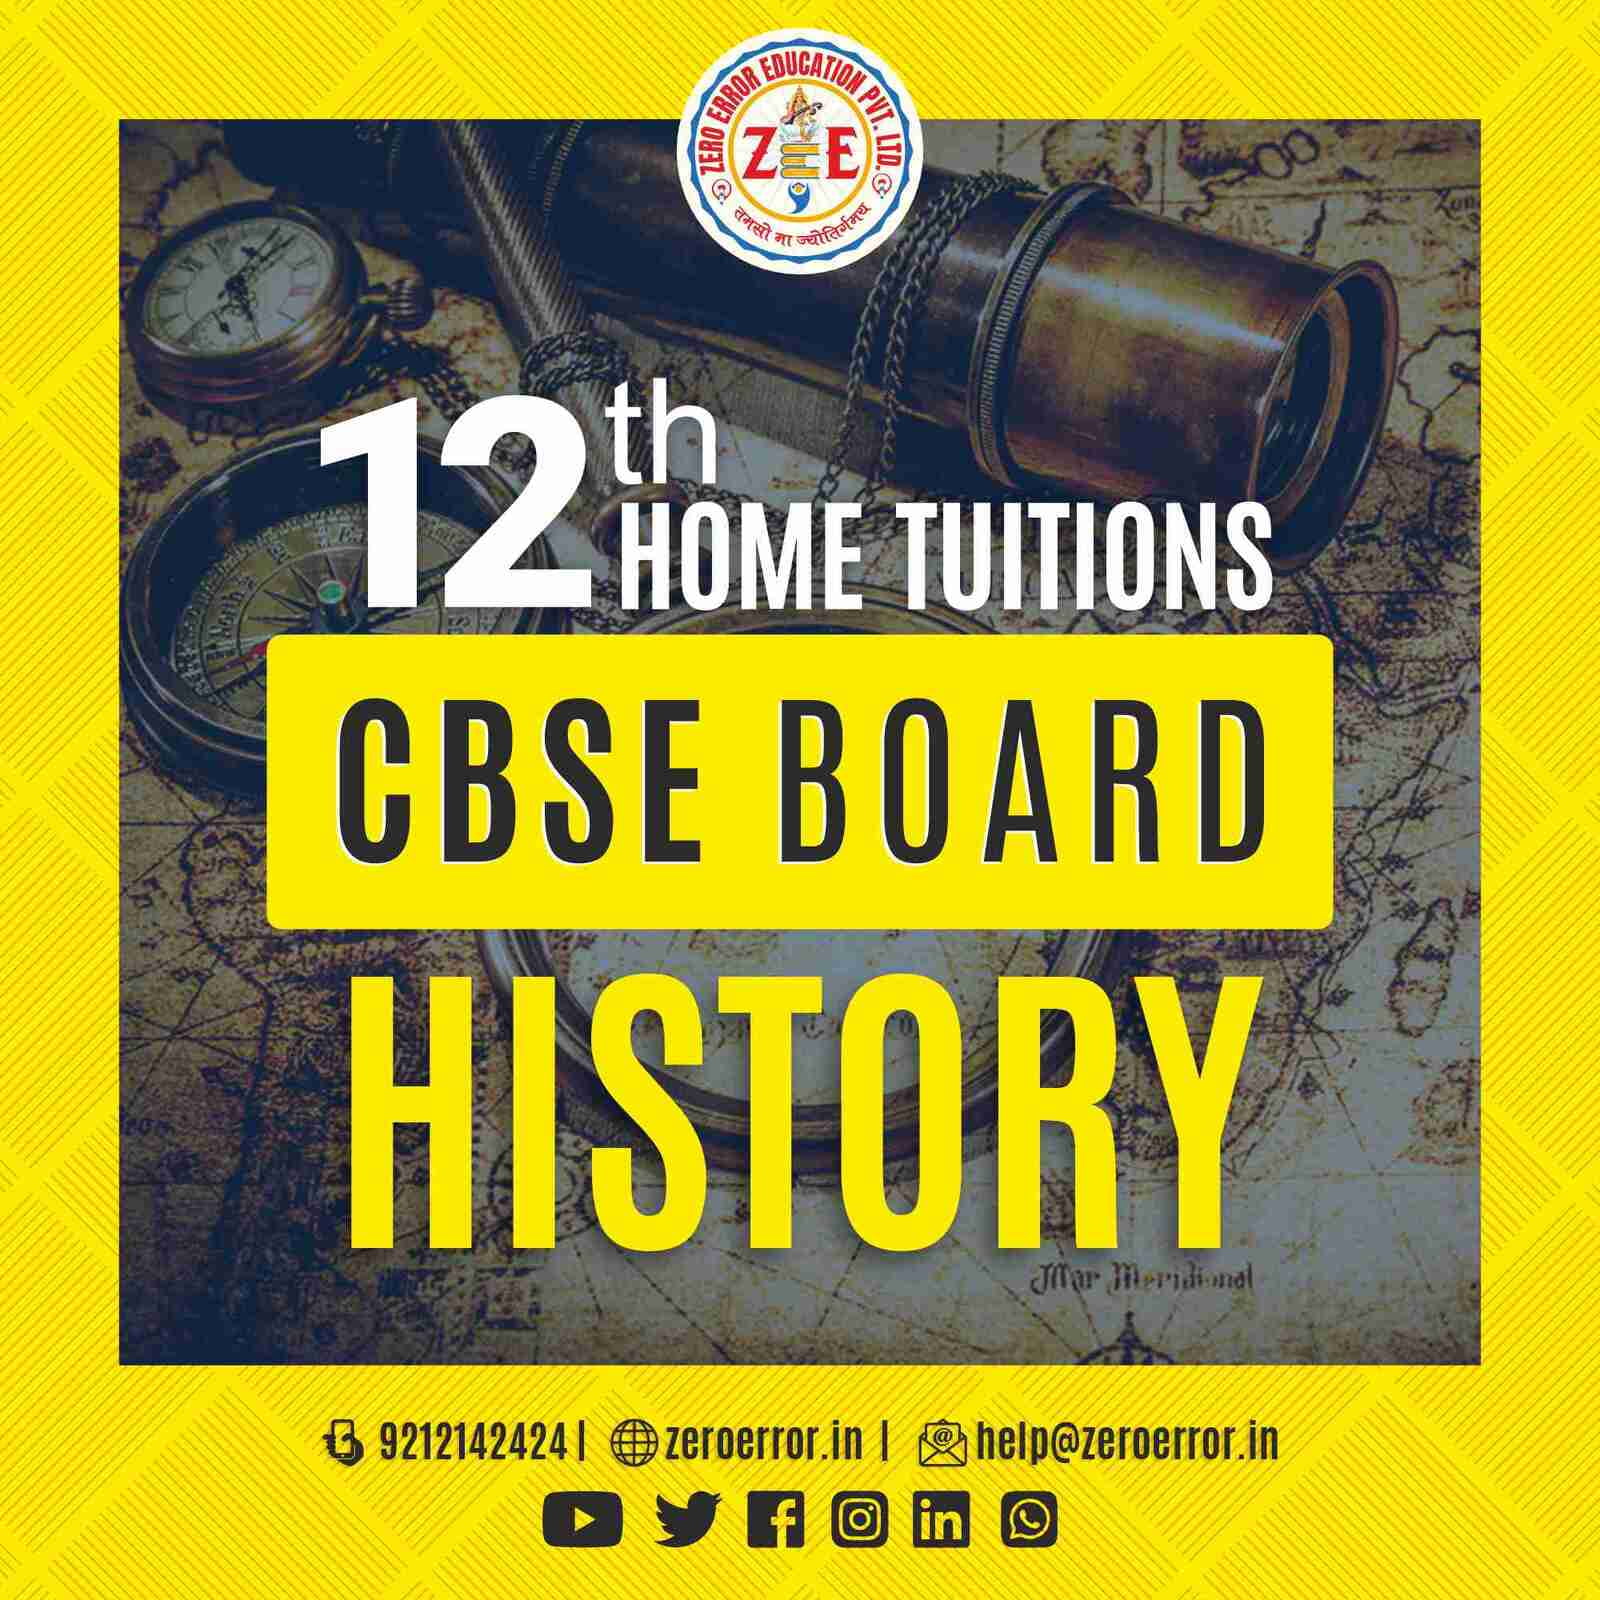 12th Grade CBSE History Online Classes by Zero Error Education Prepare for your CBSE board exams with online and offline History classes for 12th grade. Learn from experienced home tutors and get all the help you need to succeed. Enroll today at Zero Error Education. [https://zeroerror.in/] Call 9212142424 for more information.